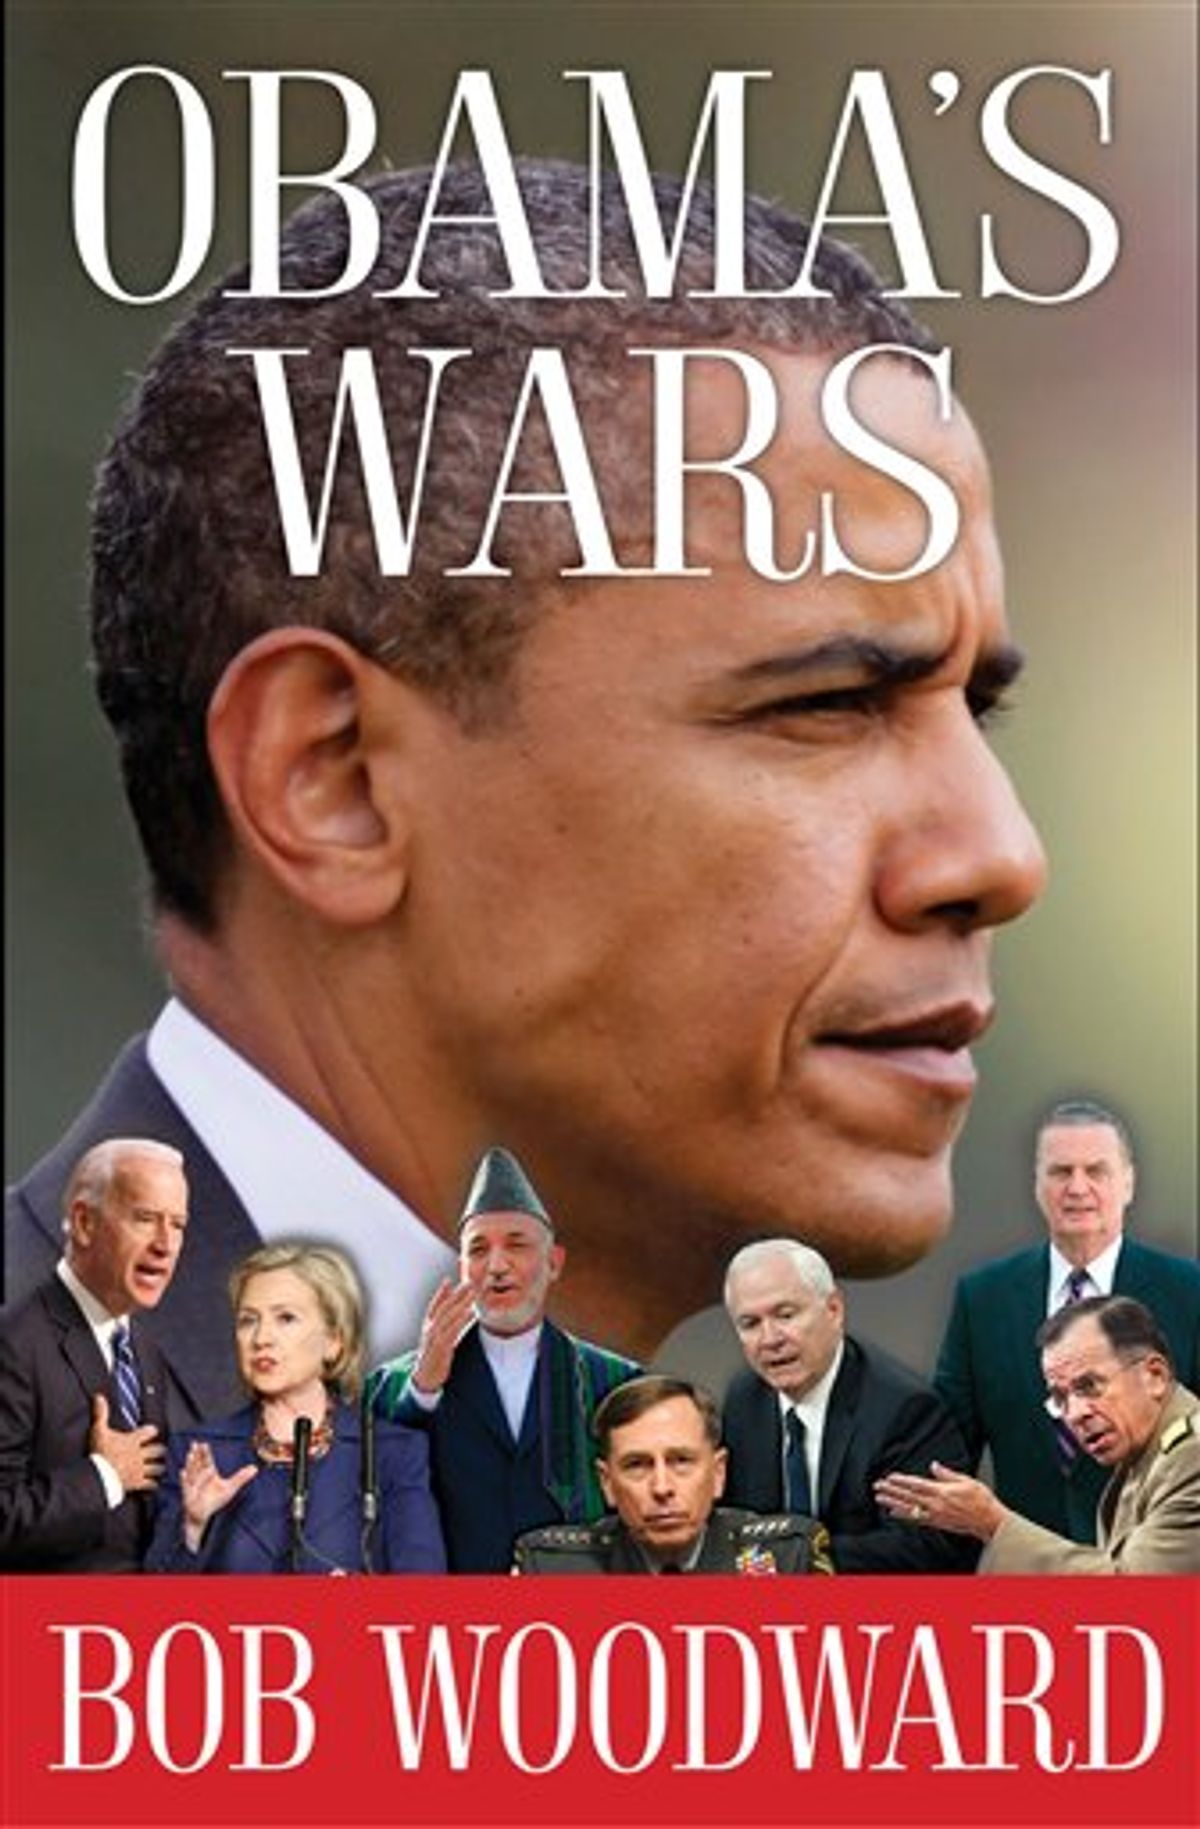 This image provided by Simon &amp; Schuster shows the cover of Bob Woodward's new book, "Obama's Wars". Woodward's latest investigative work will run 441 pages and show Obama "making the critical decisions on the Afghanistan War, the secret war in Pakistan and the worldwide fight against terrorism," Simon &amp; Schuster announced Tuesday Sept. 7, 2010. The book is scheduled to go on sale Sept. 27, 2010. (AP Photo/Simon &amp; Schuster) NO SALES (AP)